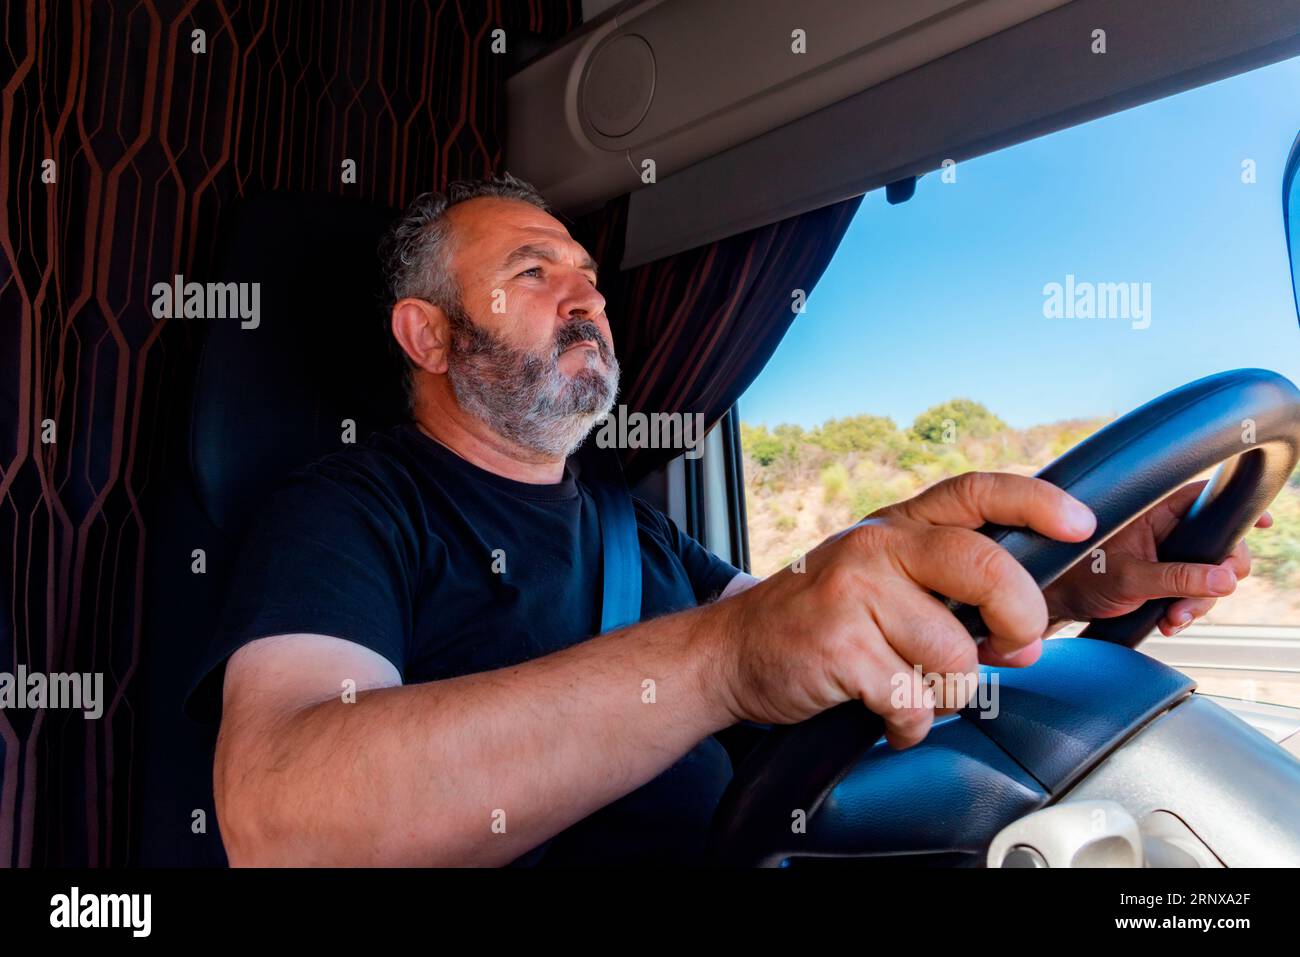 Truck driver driving with both hands on the steering wheel in an alert position. Stock Photo